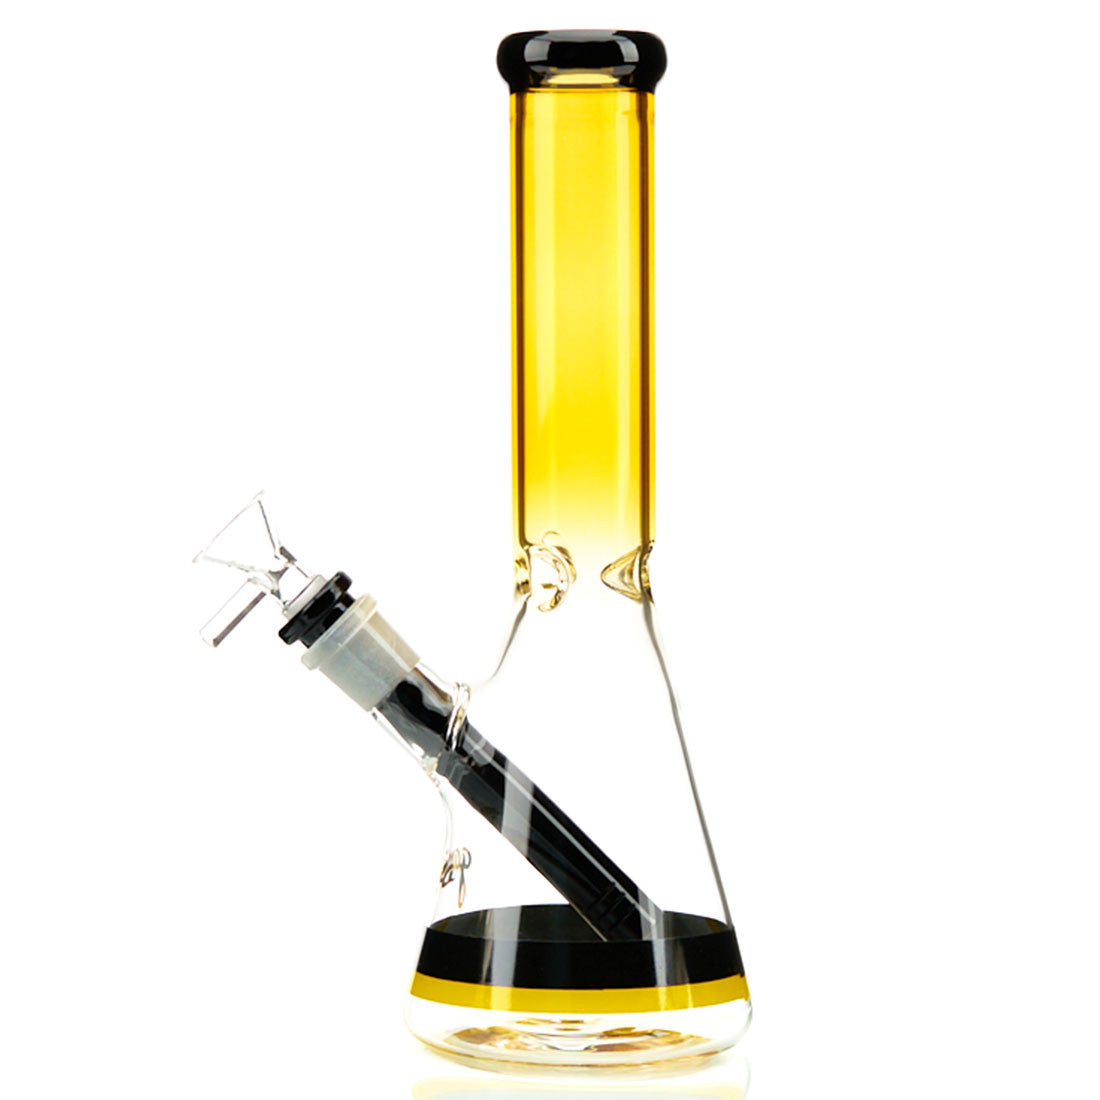 Gambino Glass Studios 10-inch beaker with gold and black accented glass